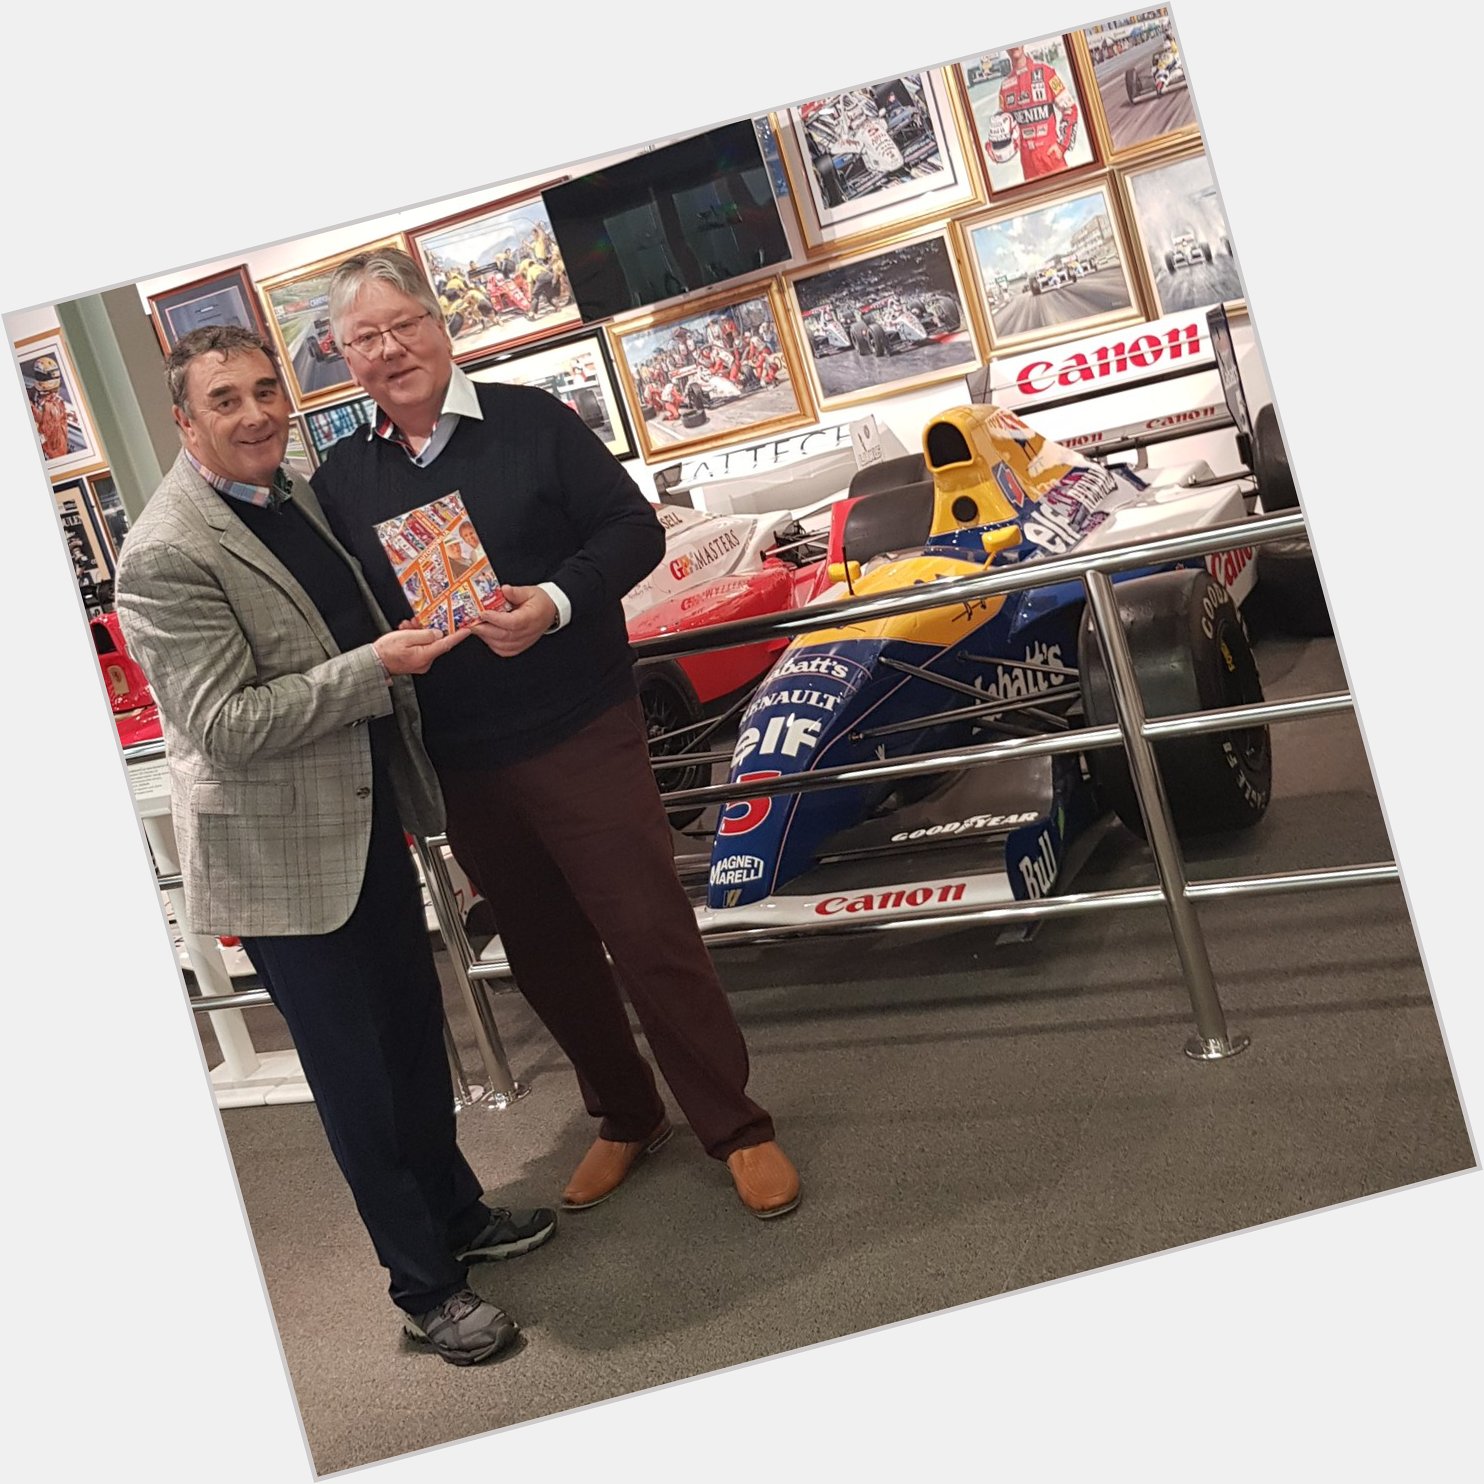 HAPPY BIRTHDAY ! to Nigel Mansell today and thank you again Nigel for doing the forward to my book ! 